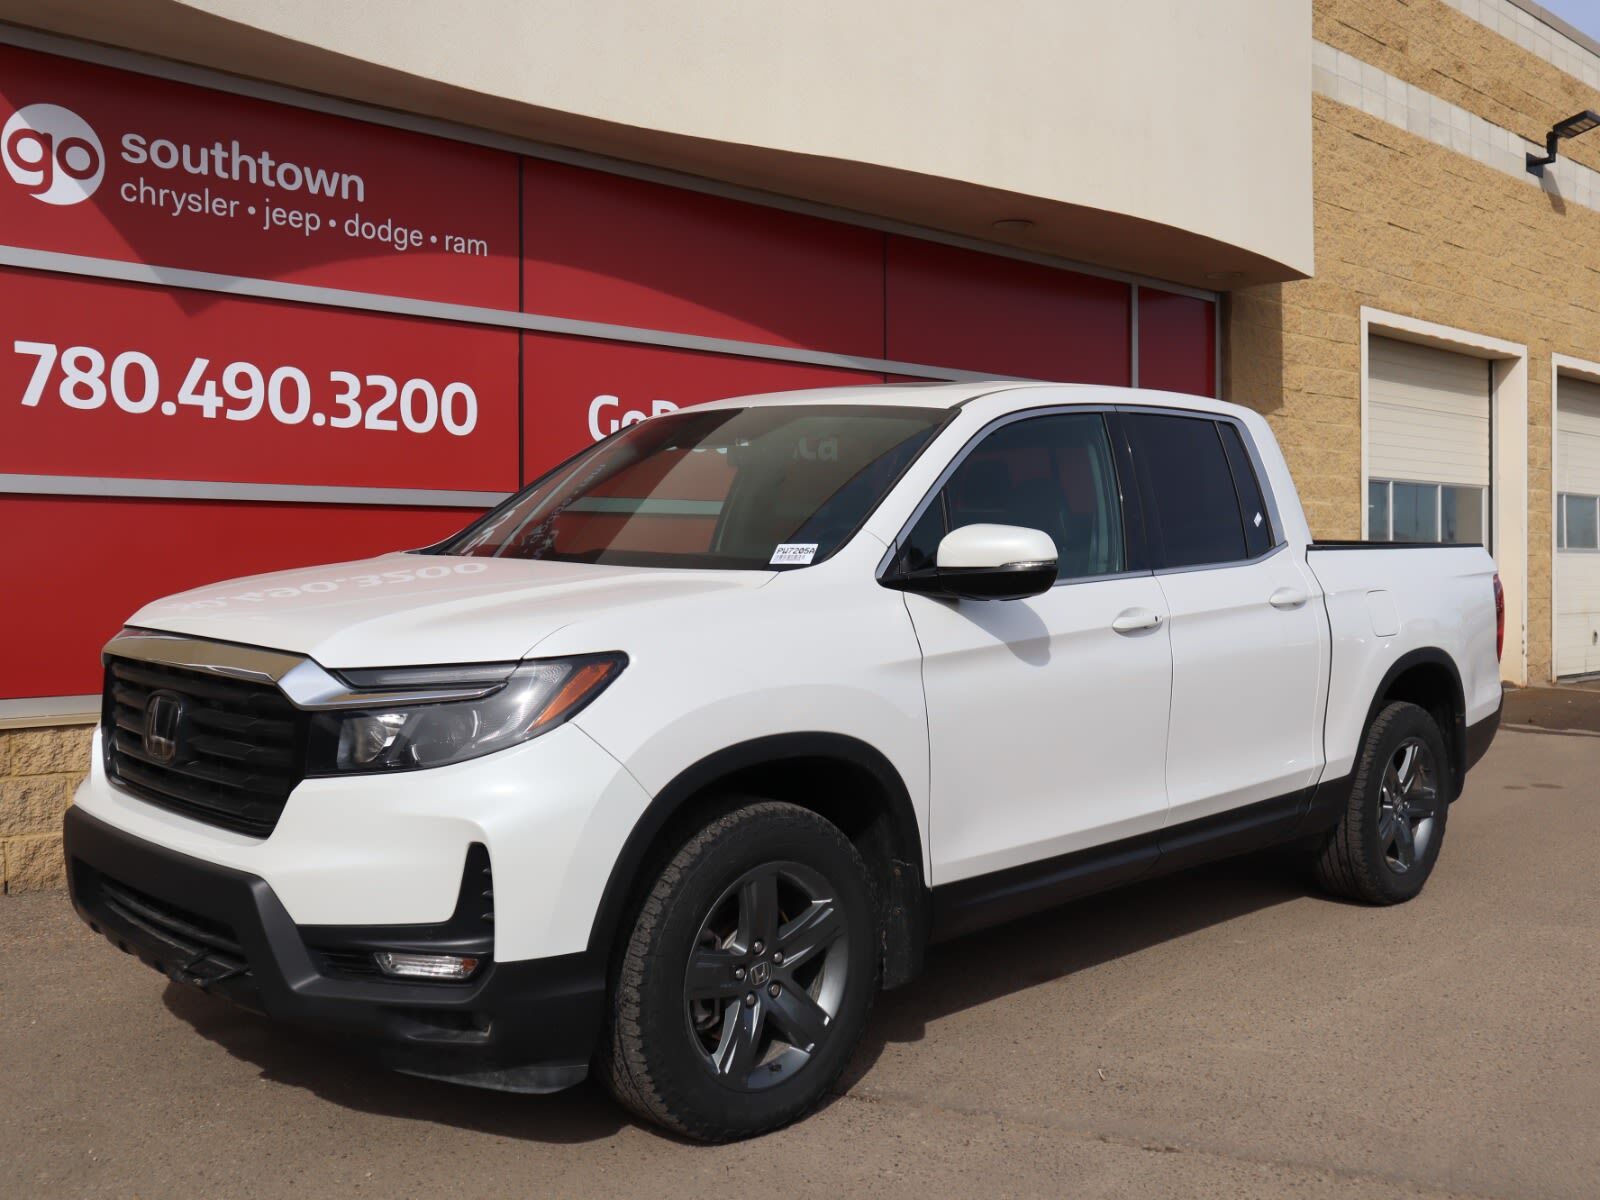 2022 Honda Ridgeline  TOURING IN WHITE EQUIPPED WITH A 280HP 3.5L VTEC 